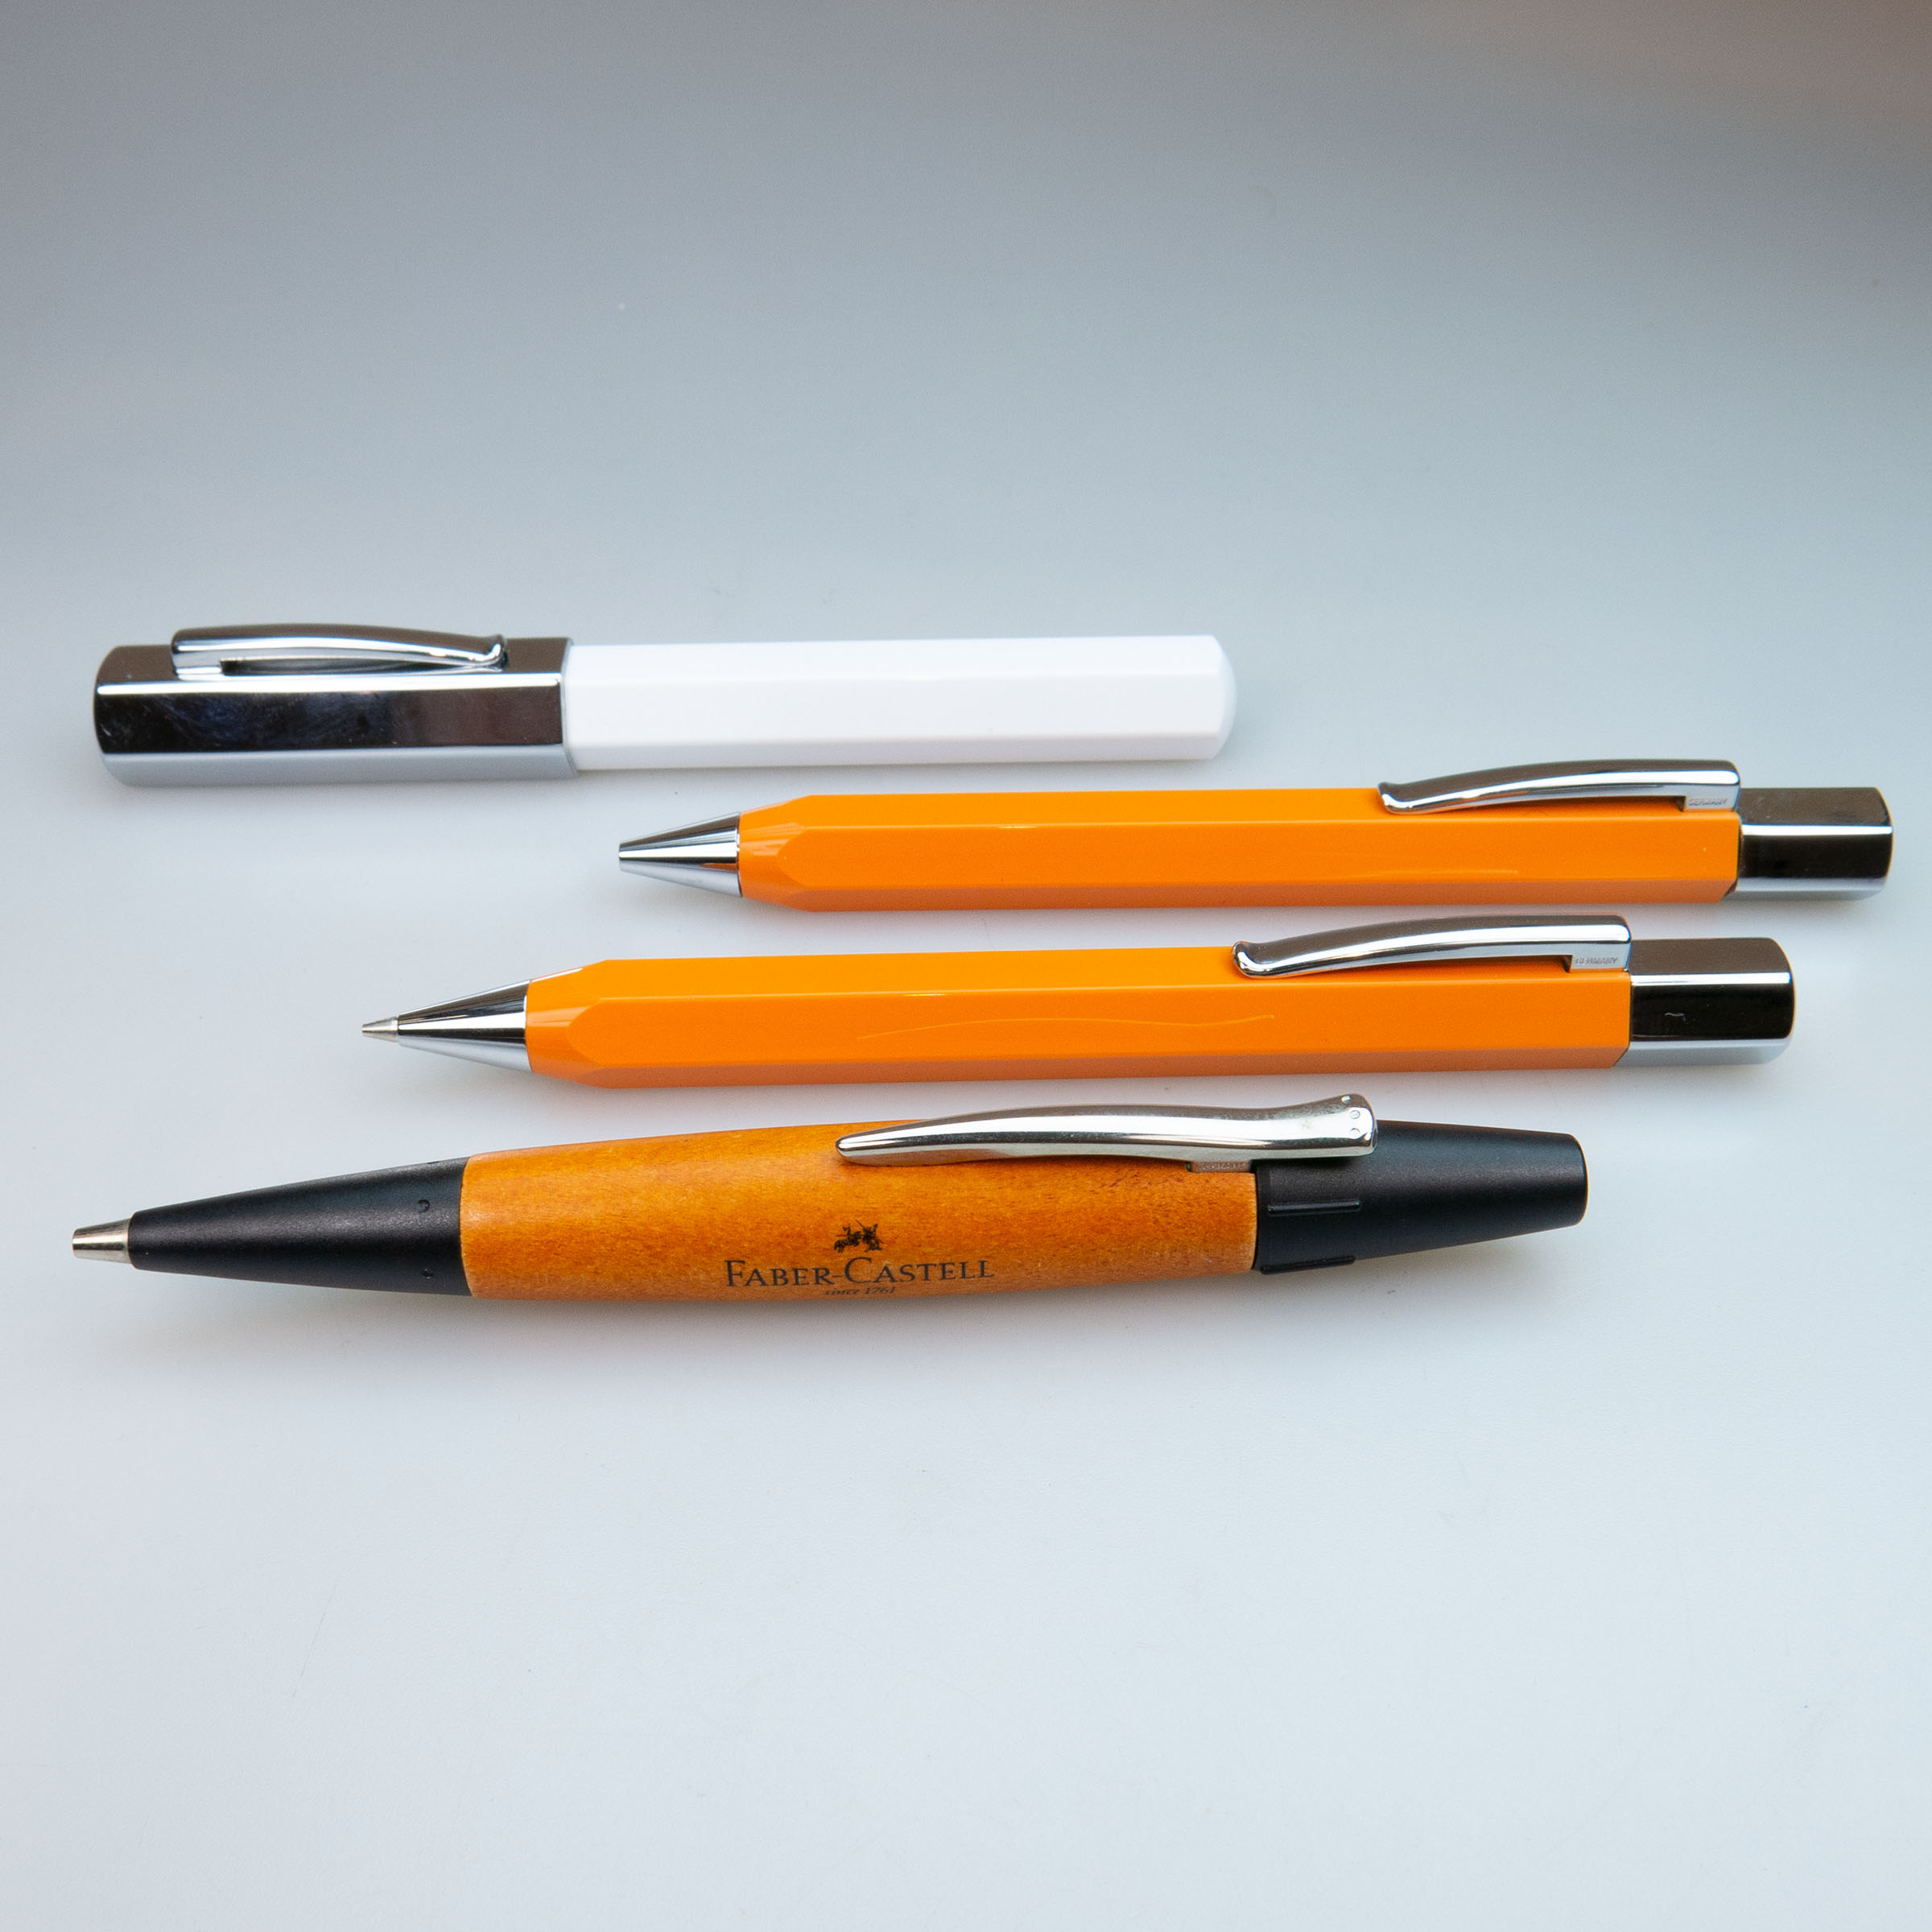 4 Faber-Castell Writing Instruments